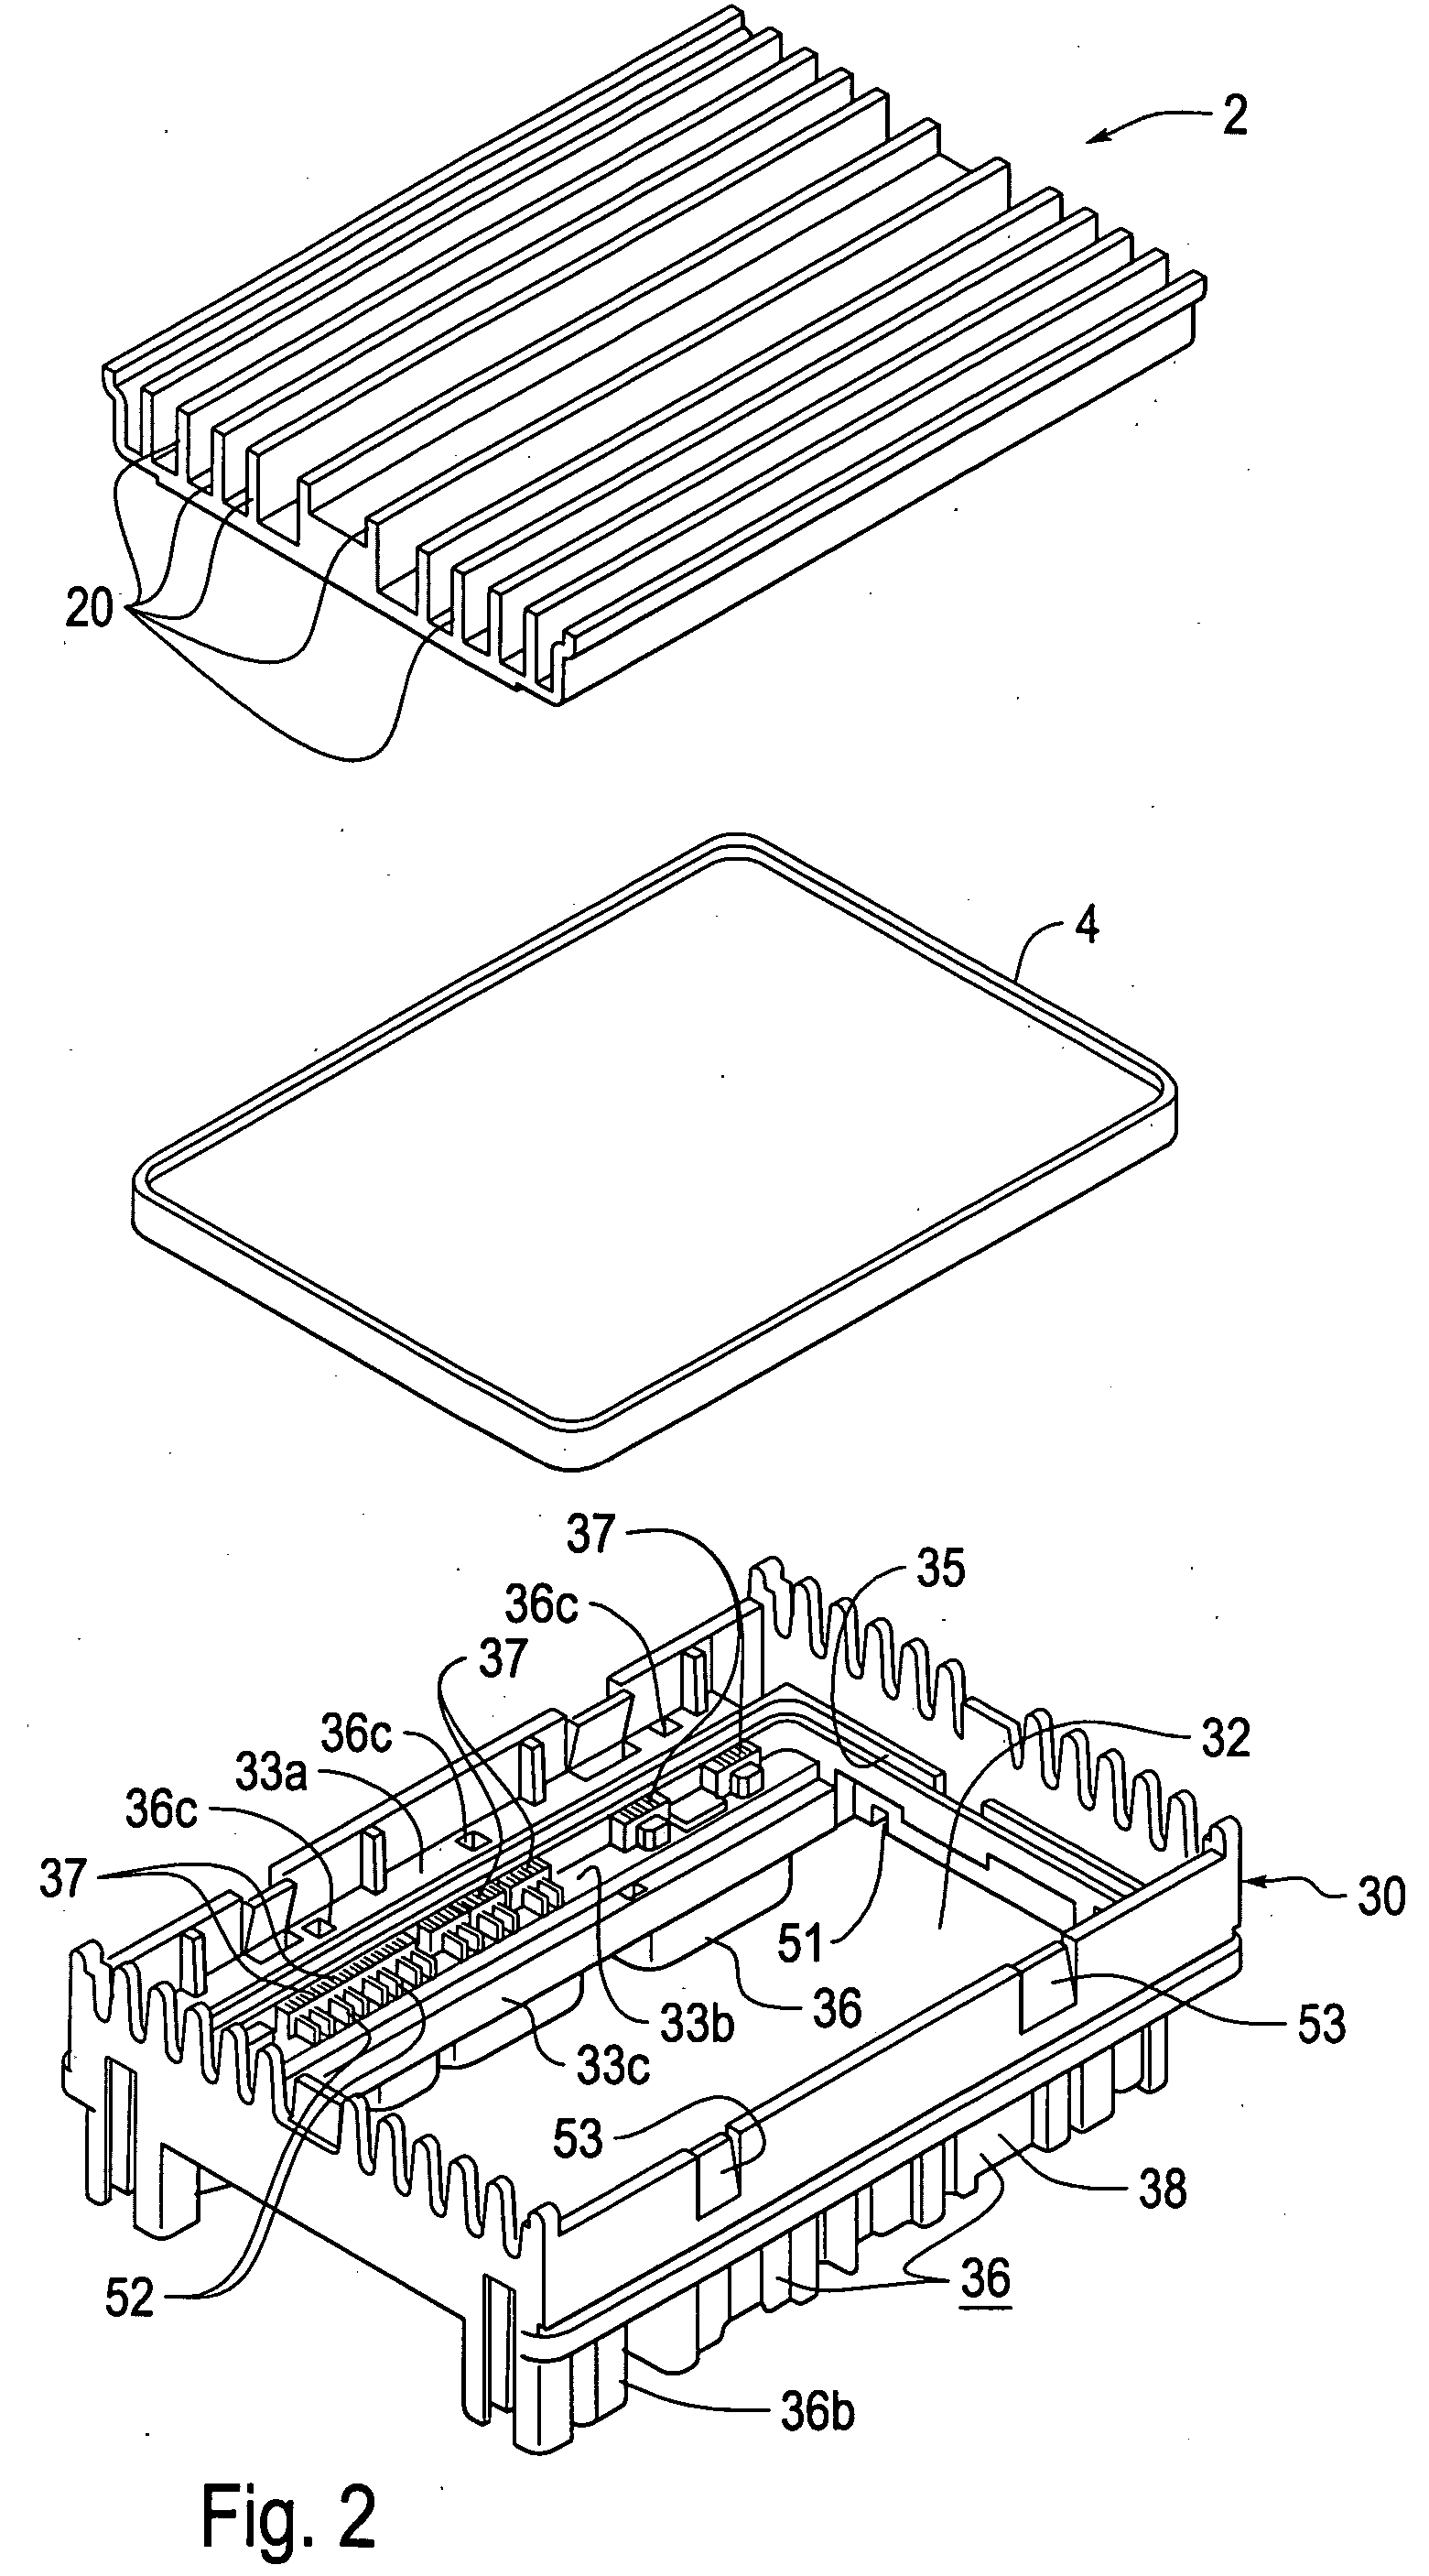 Casing unit for circuit assembly and method for producing the circuit assembly